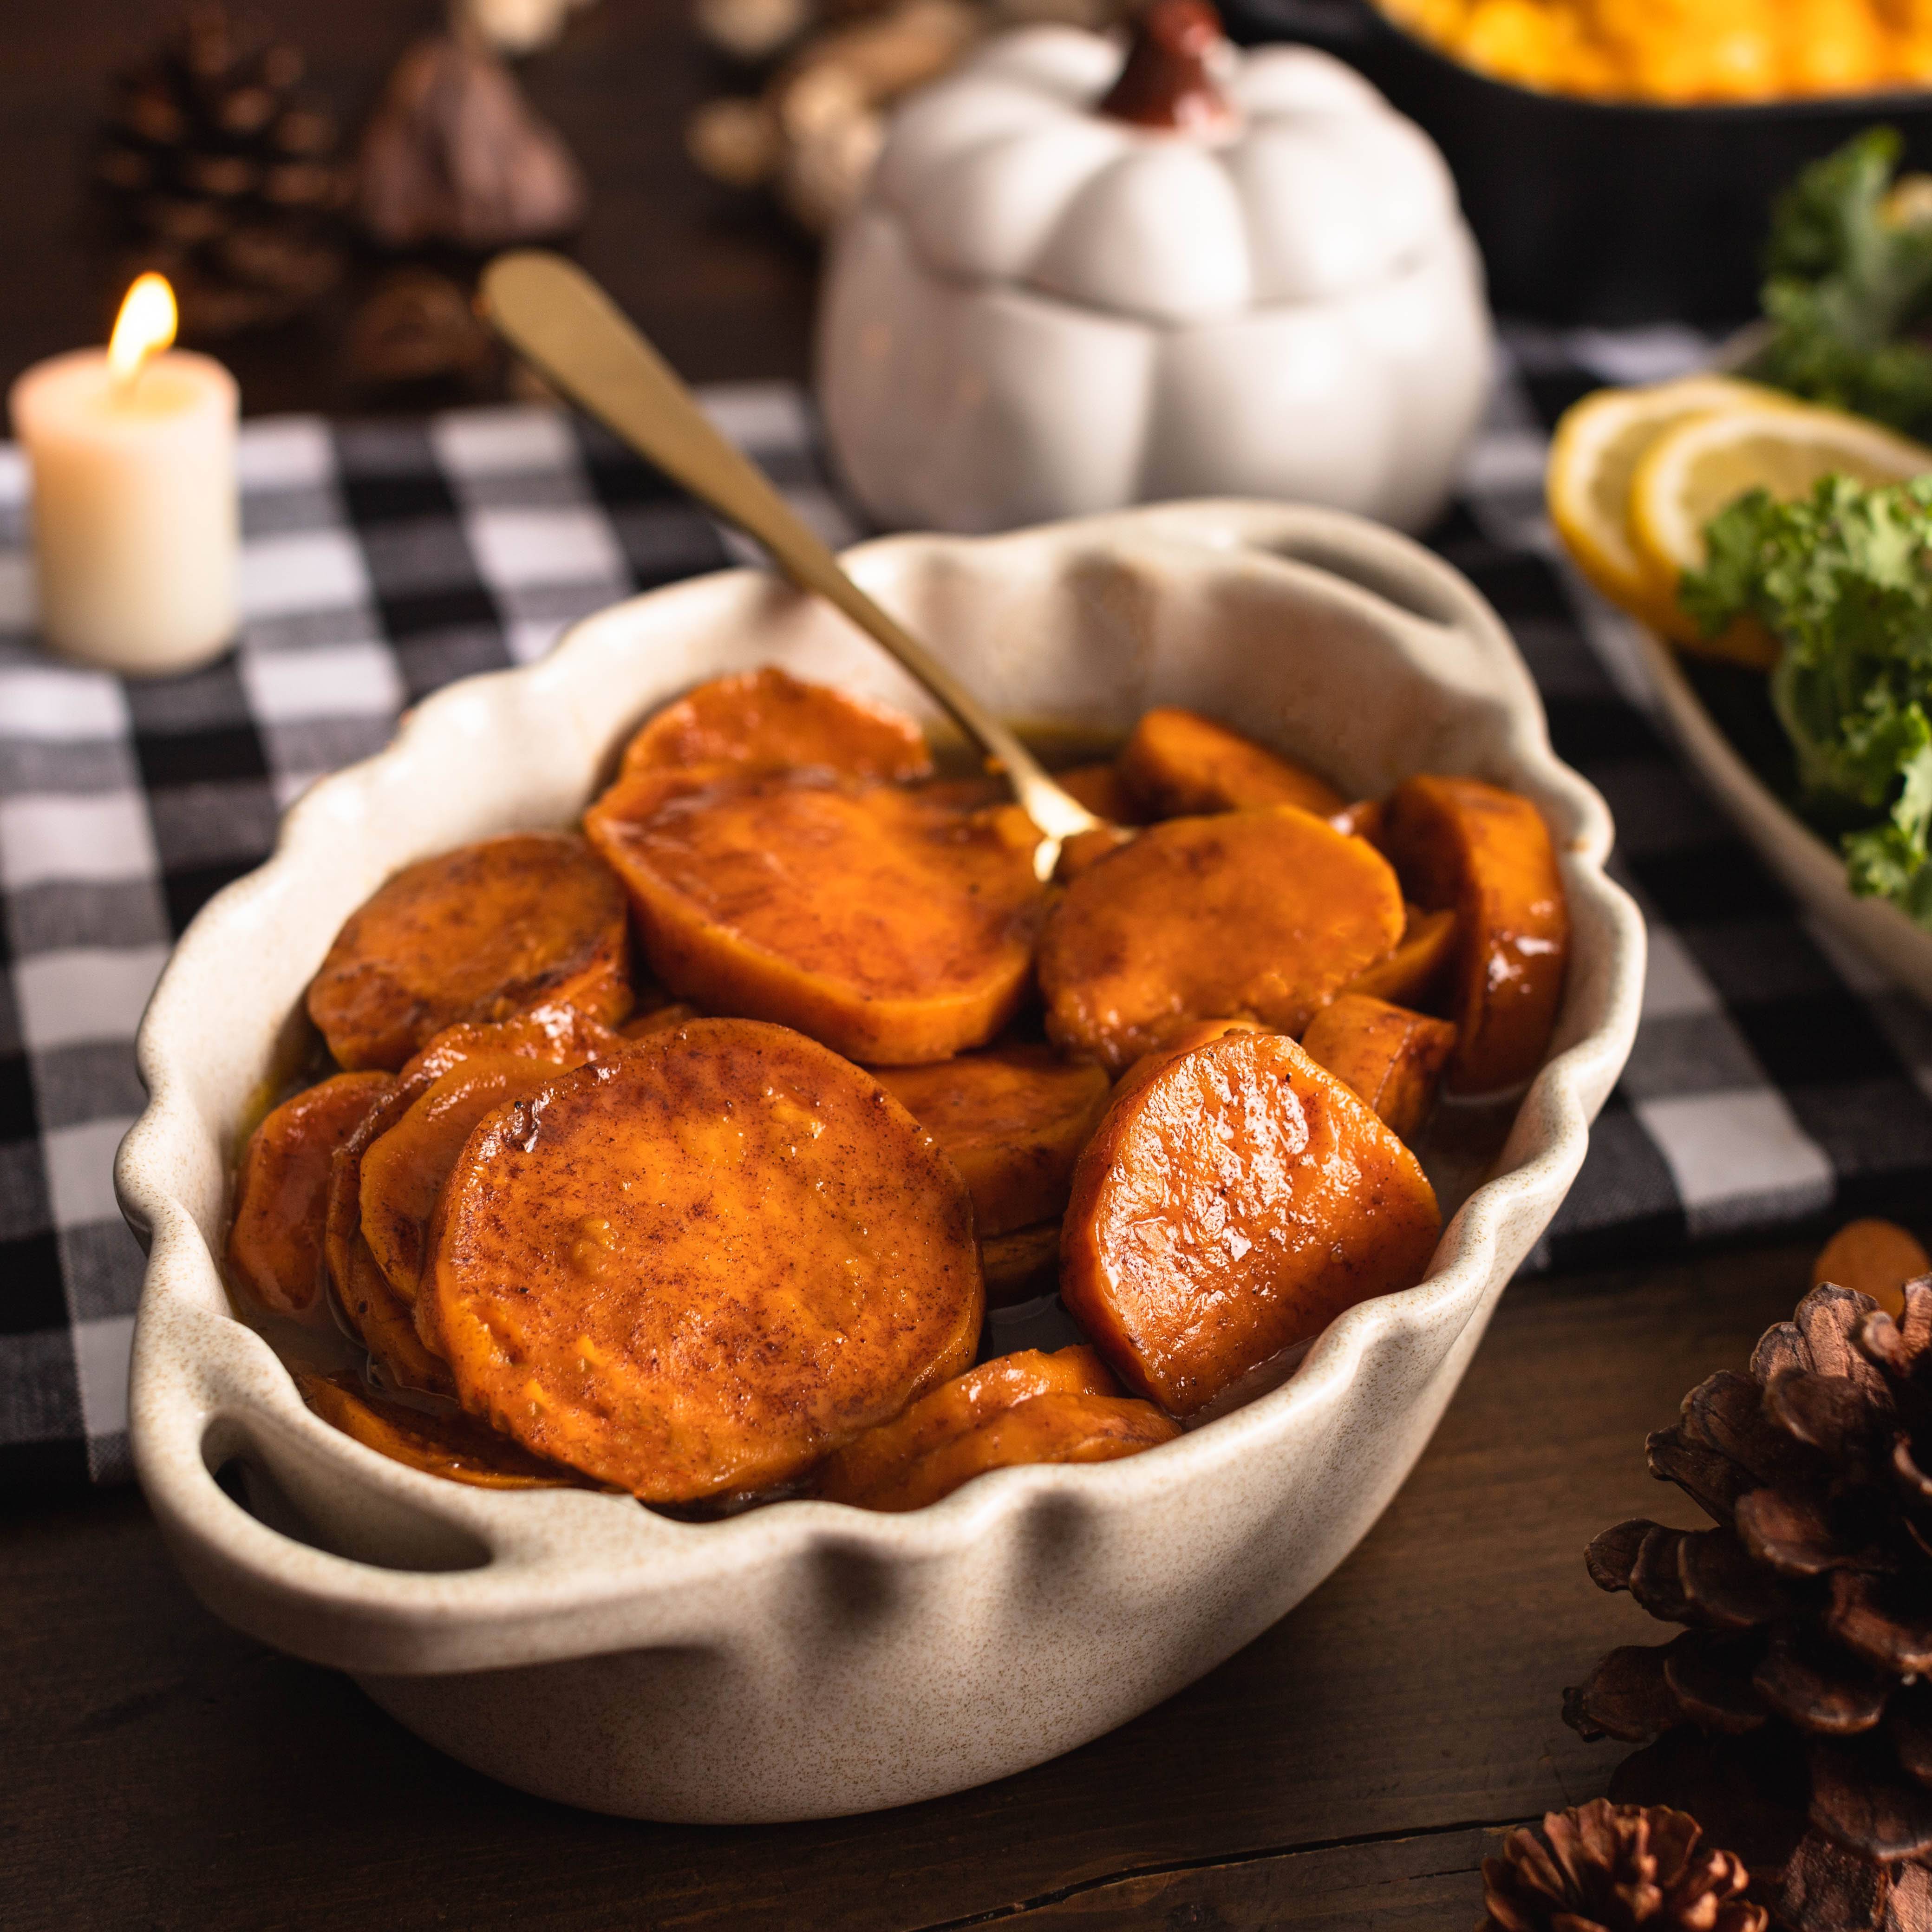 Candied Yams: The Sweetest Treat Among Thanksgiving Sides ... image